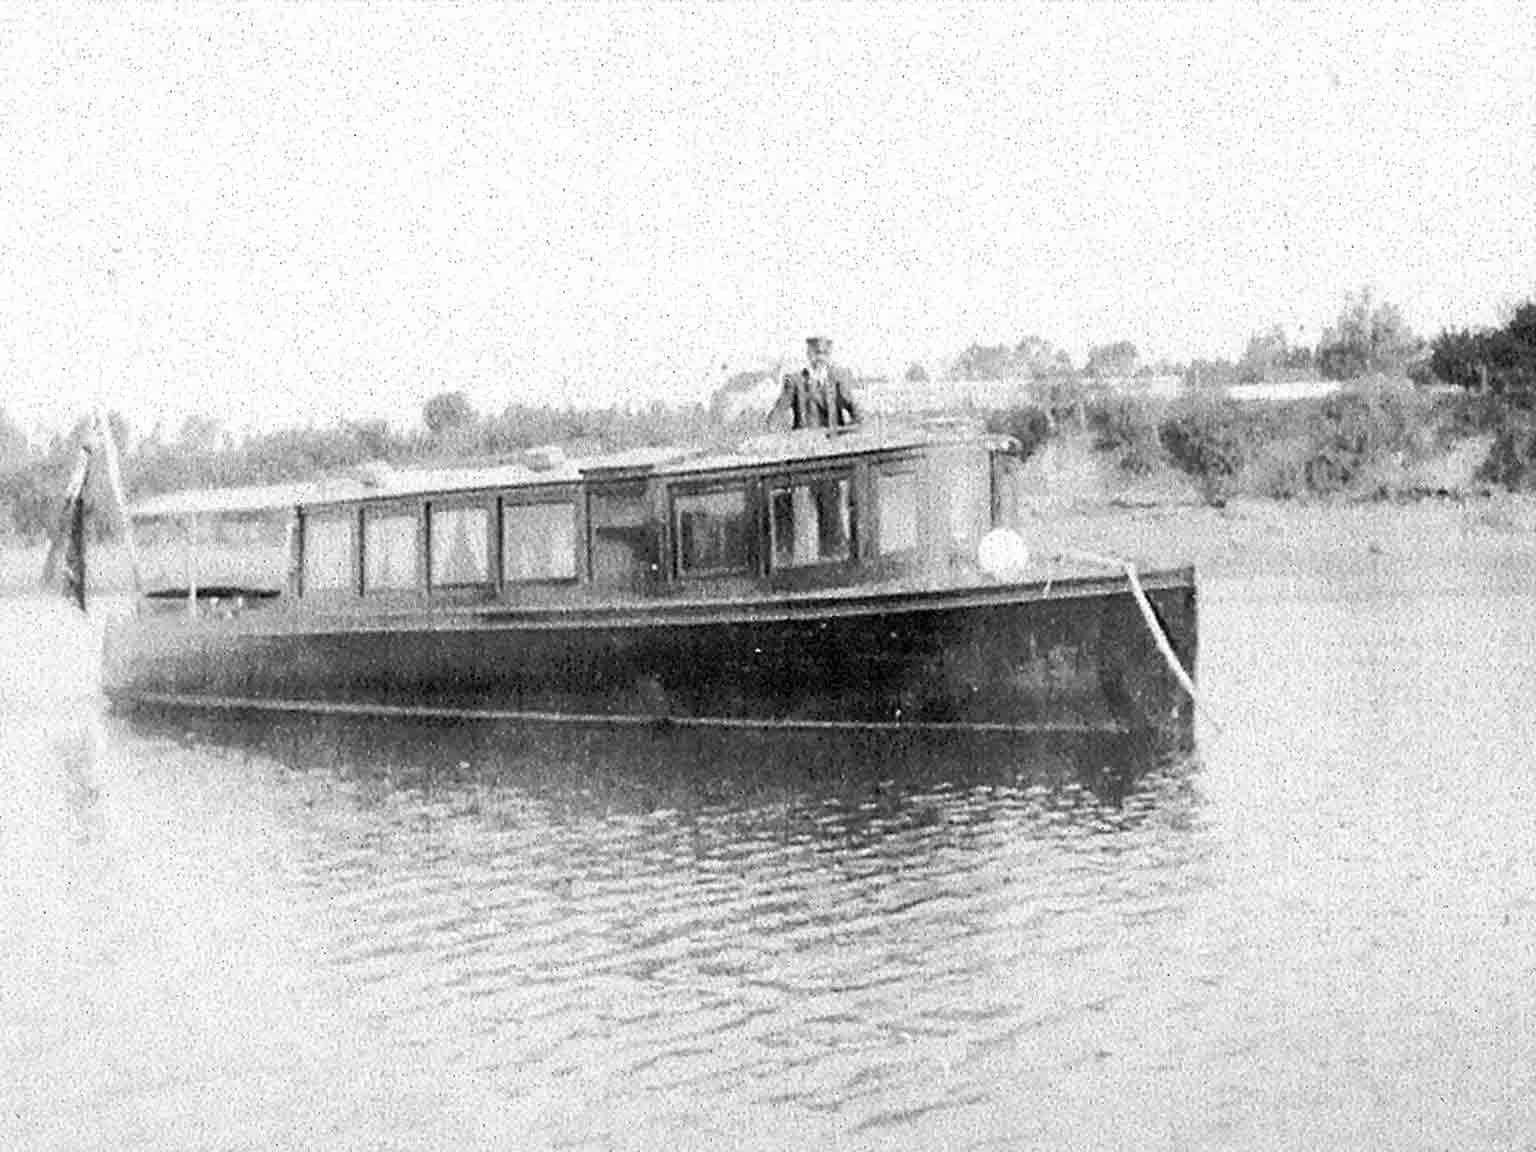 Covenhoven Yacht